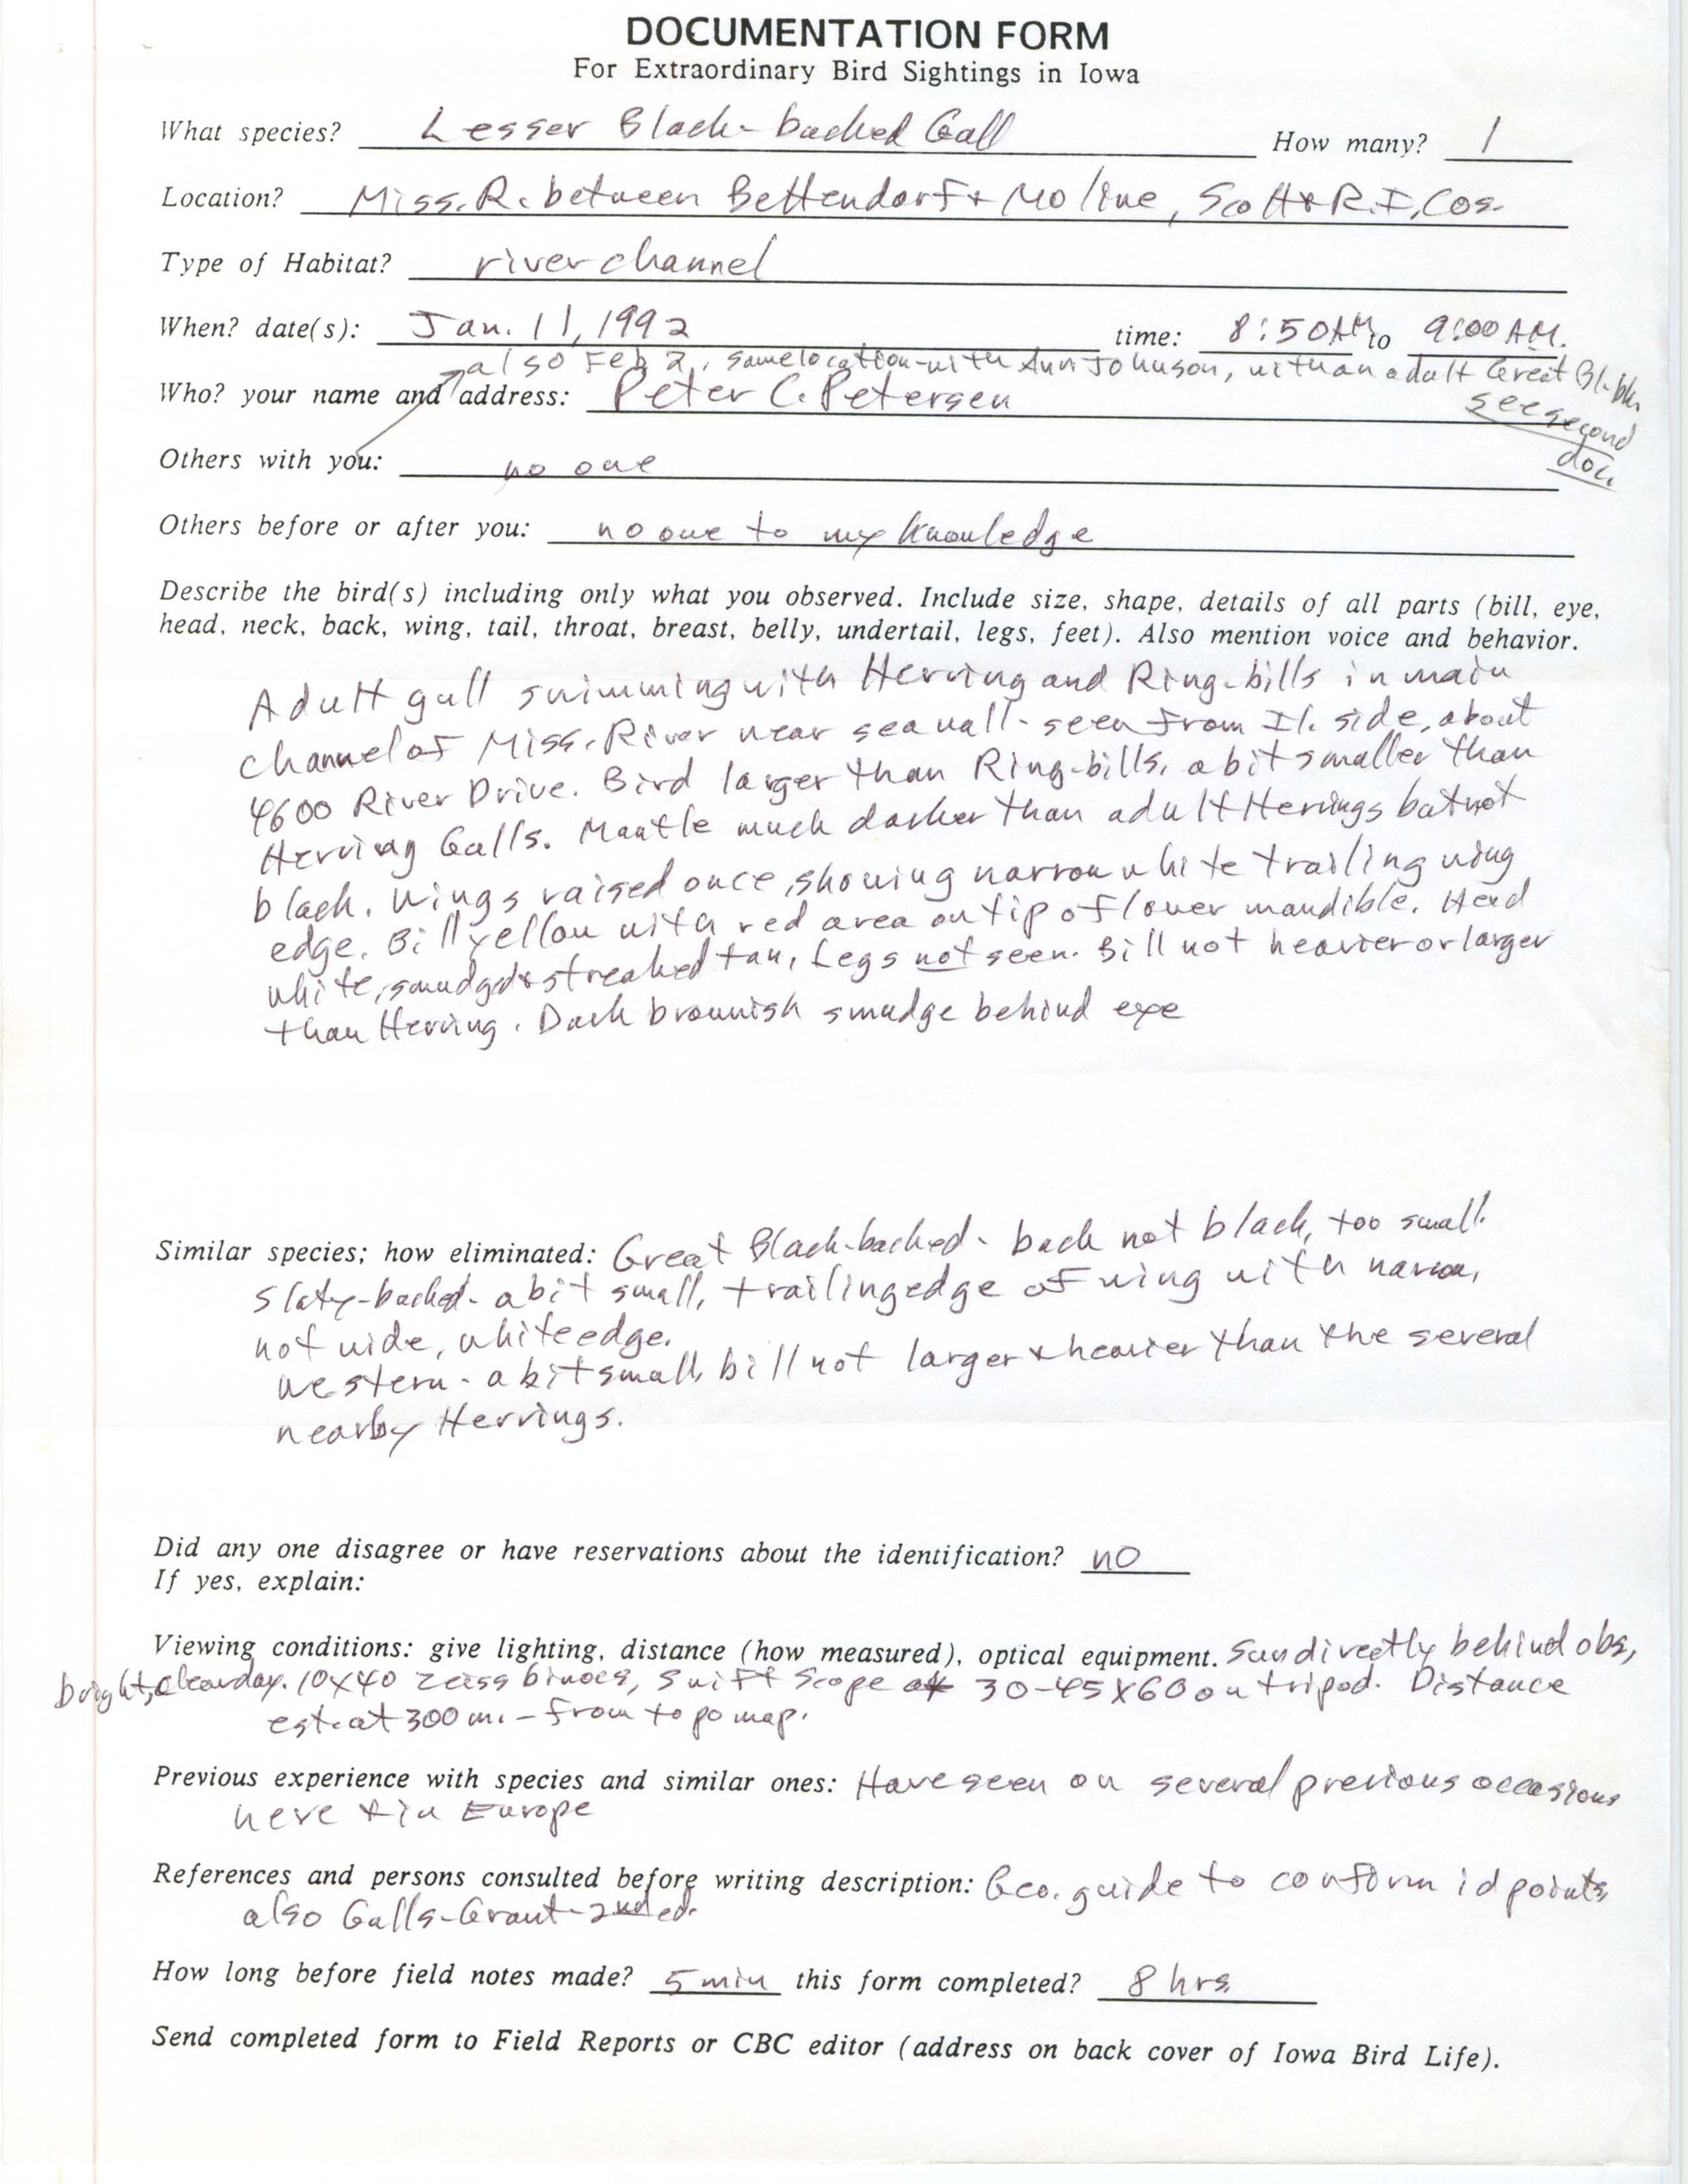 Rare bird documentation form for Lesser Black-backed Gull at Mississippi River between Bettendorf, IA and Moline, IL, 1992